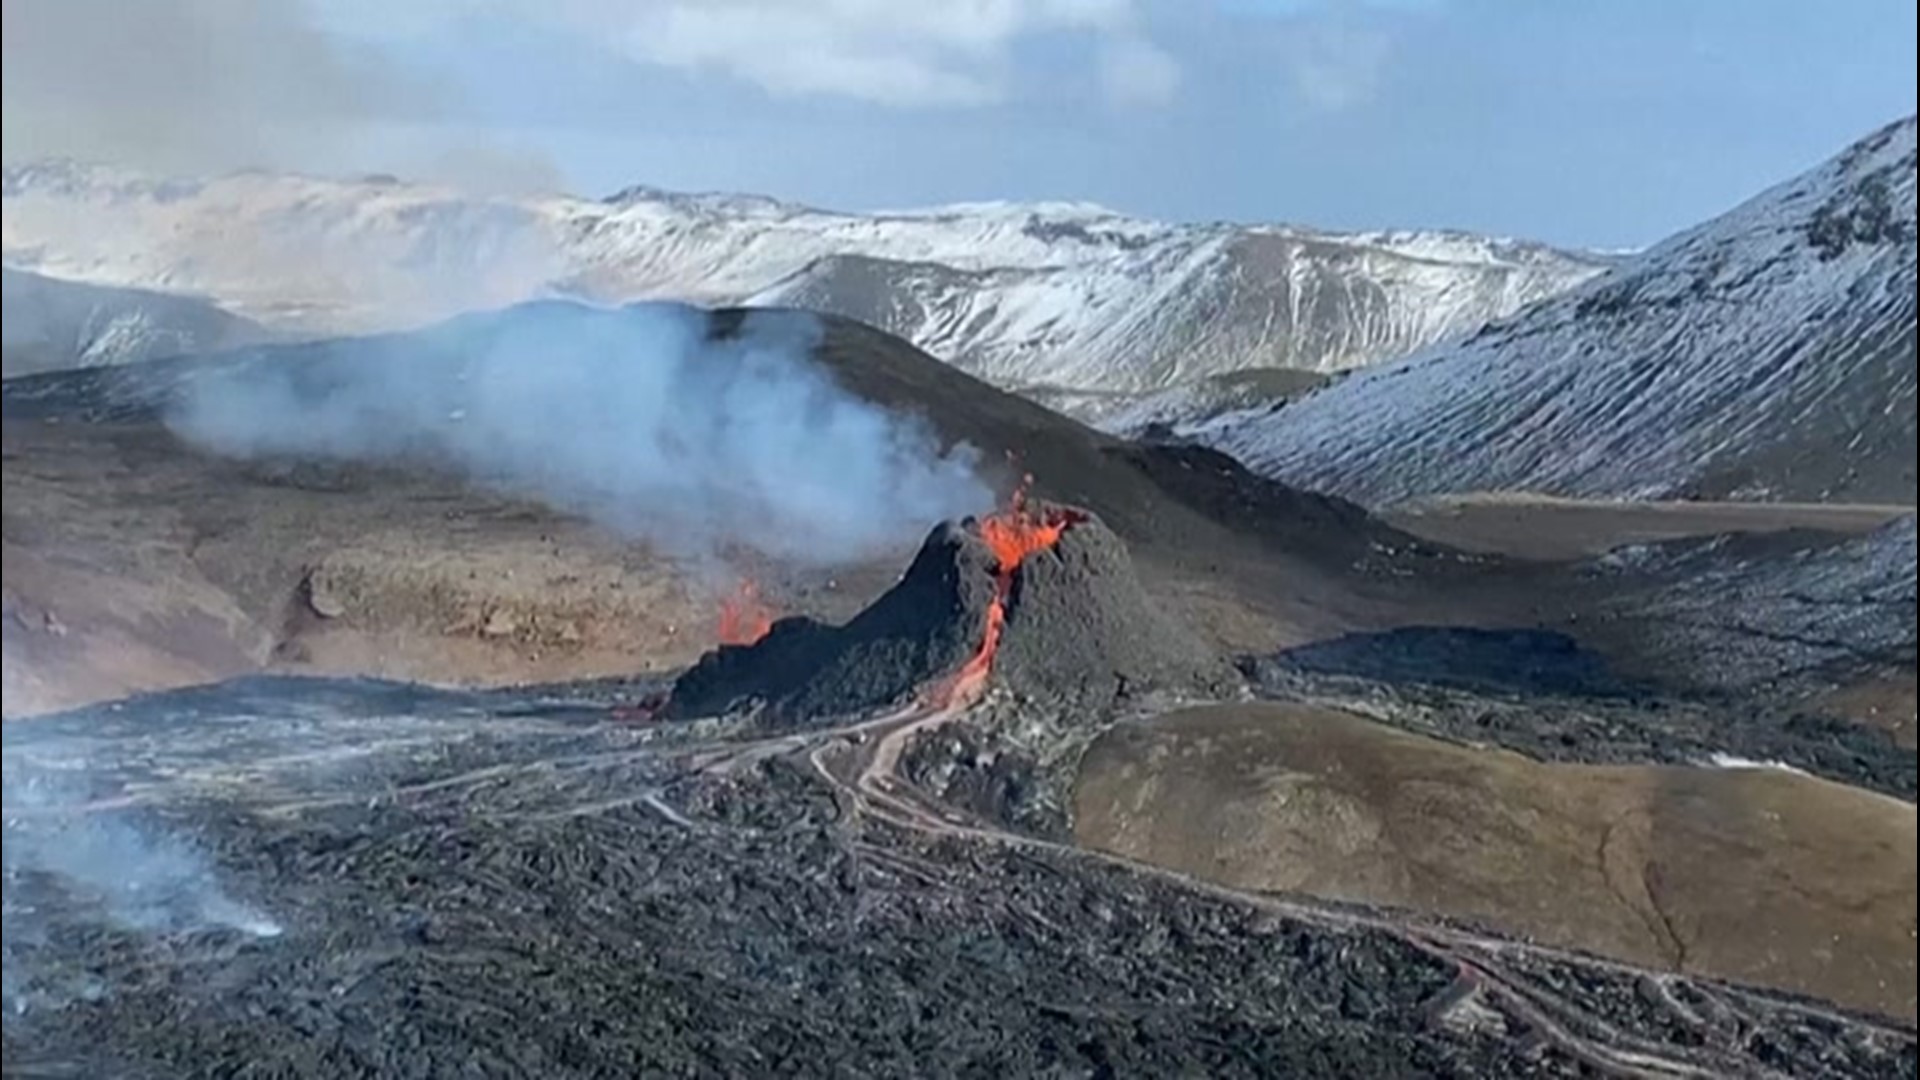 The eruption of a fissure near Mount Fagradalsfjall continued on March 23, with lava glowing red and steam rising high into the air.